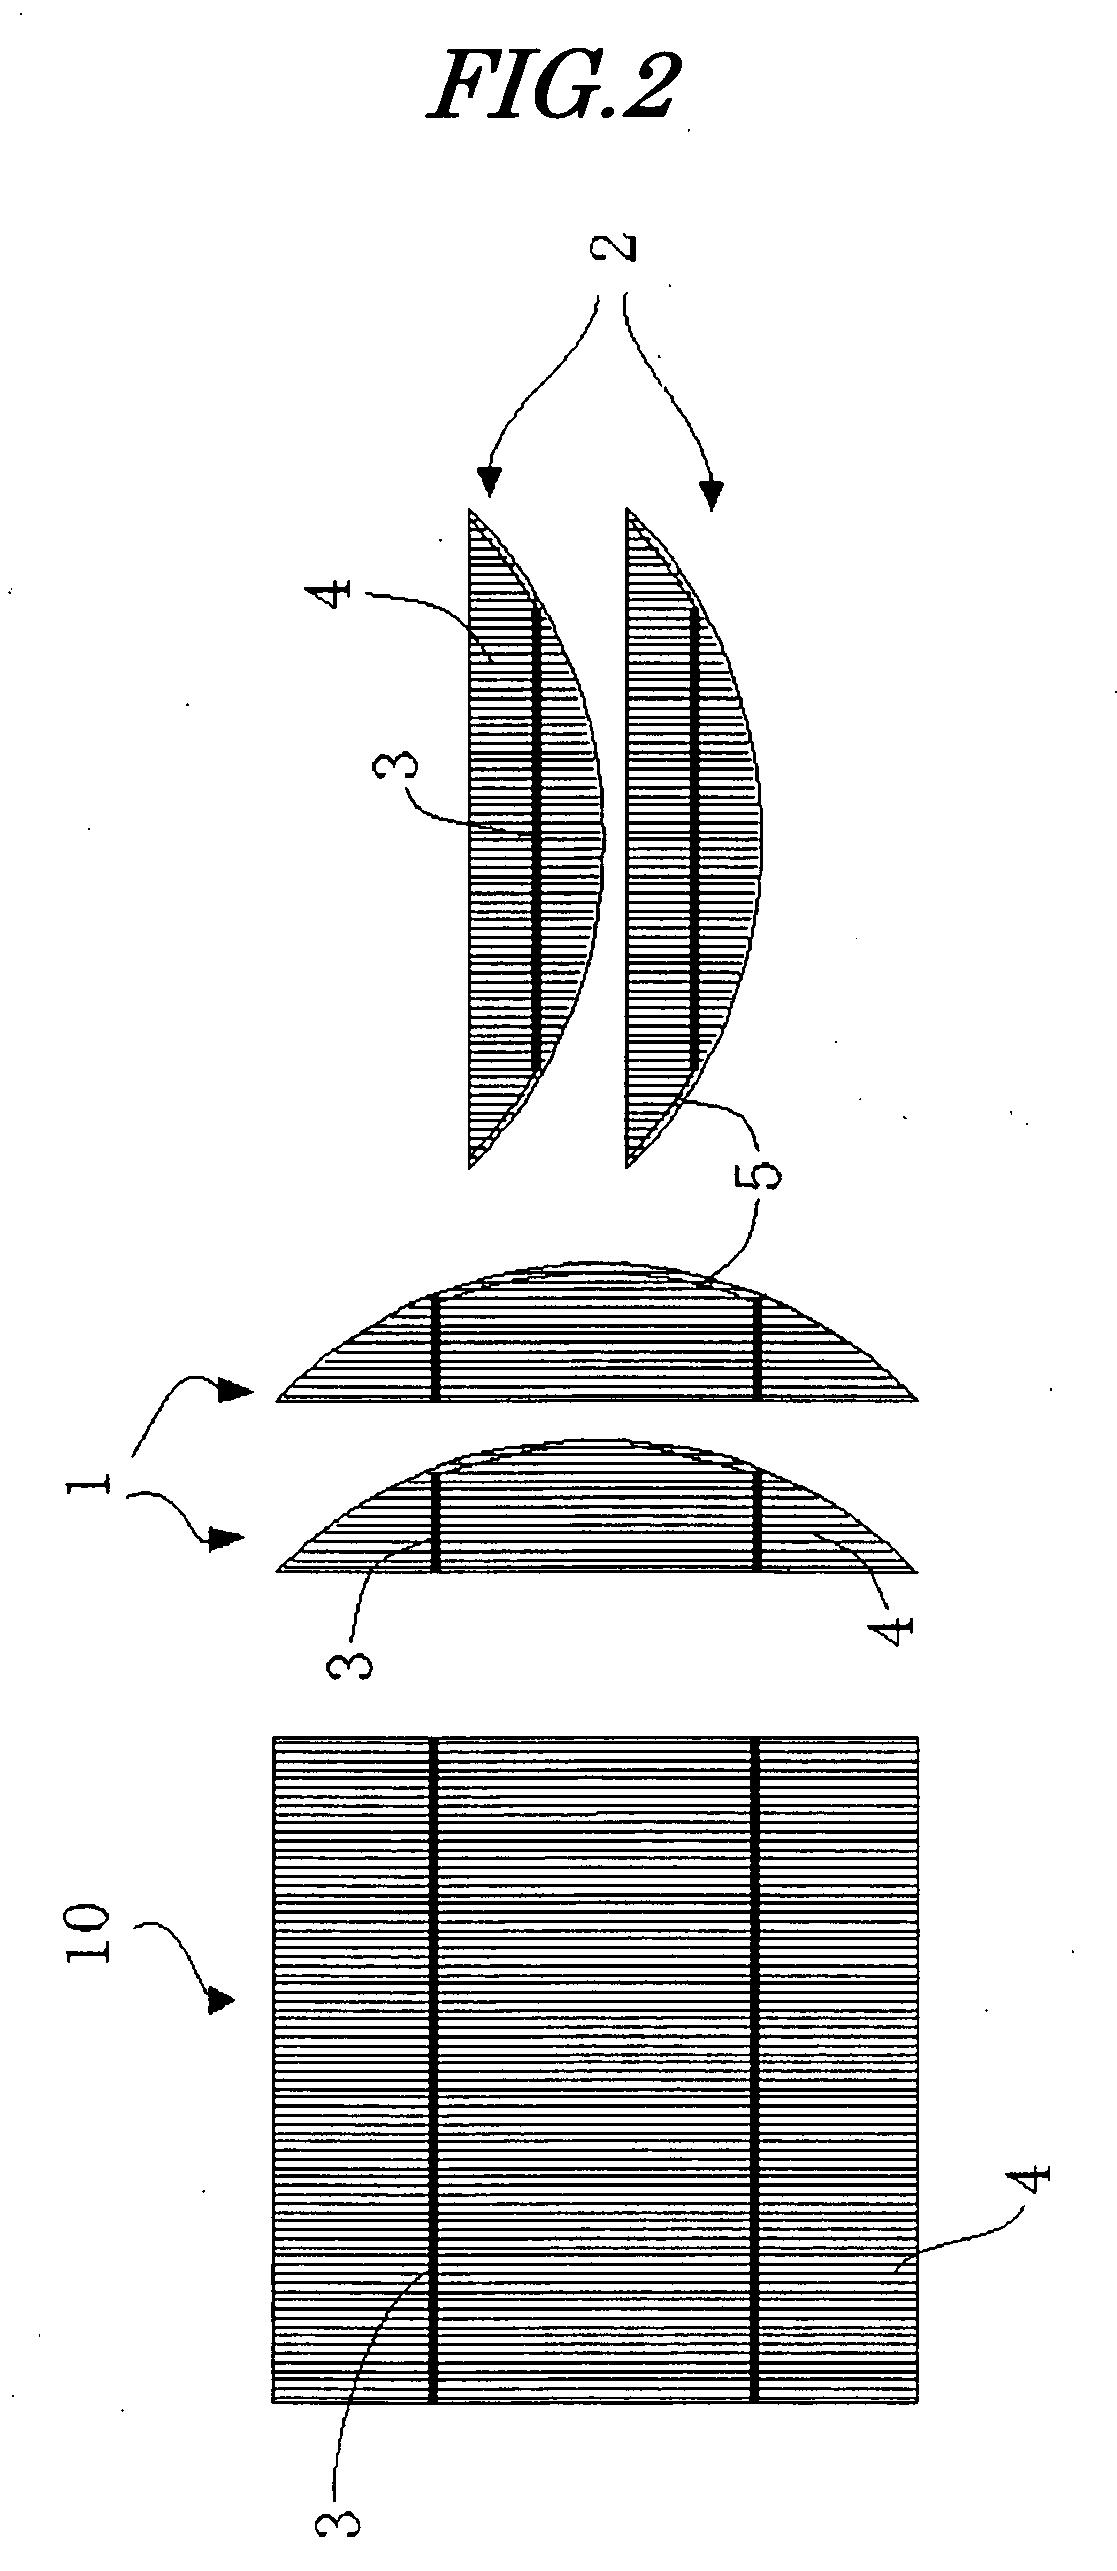 Photovoltaic Power Generation Module and Photovoltaic Power Generation System Employing Same